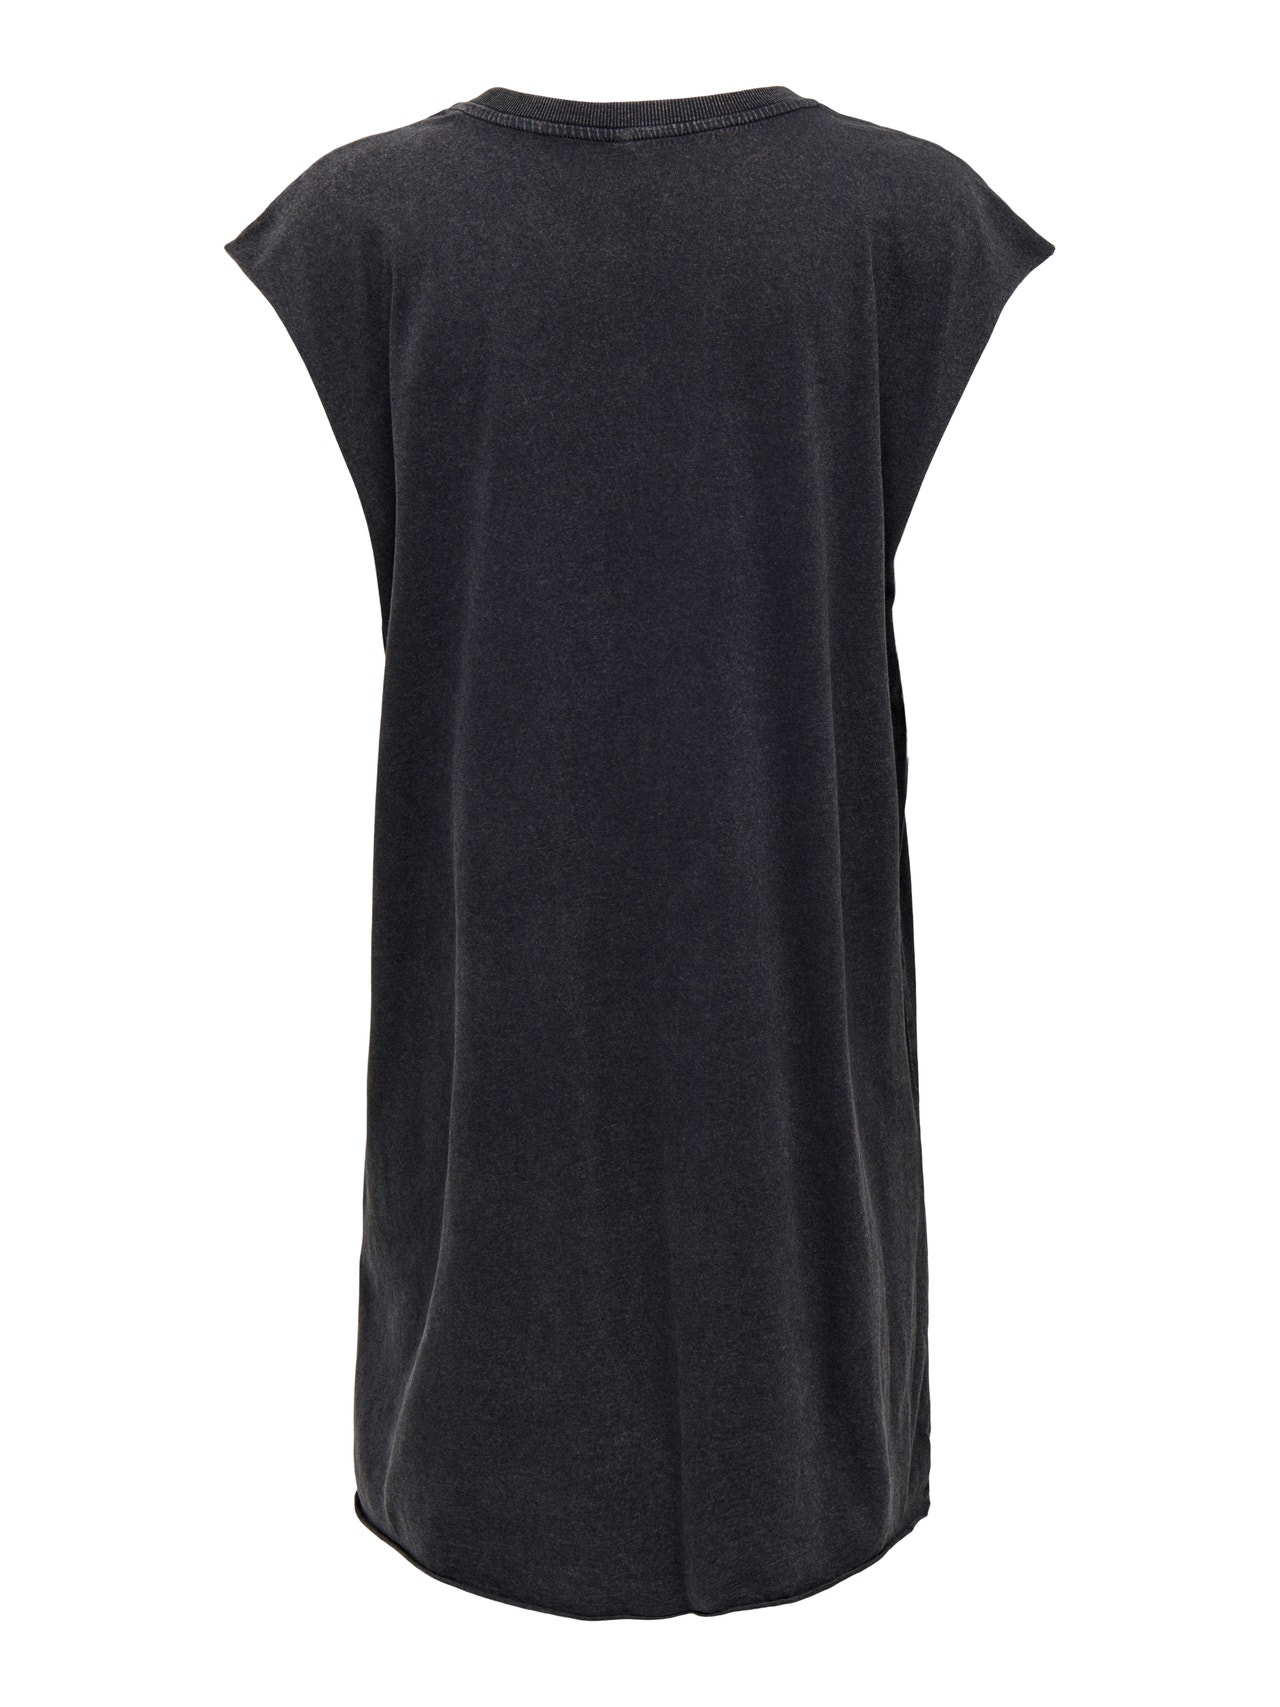 ONLY Mini dress with o-neck -Black - 15296868